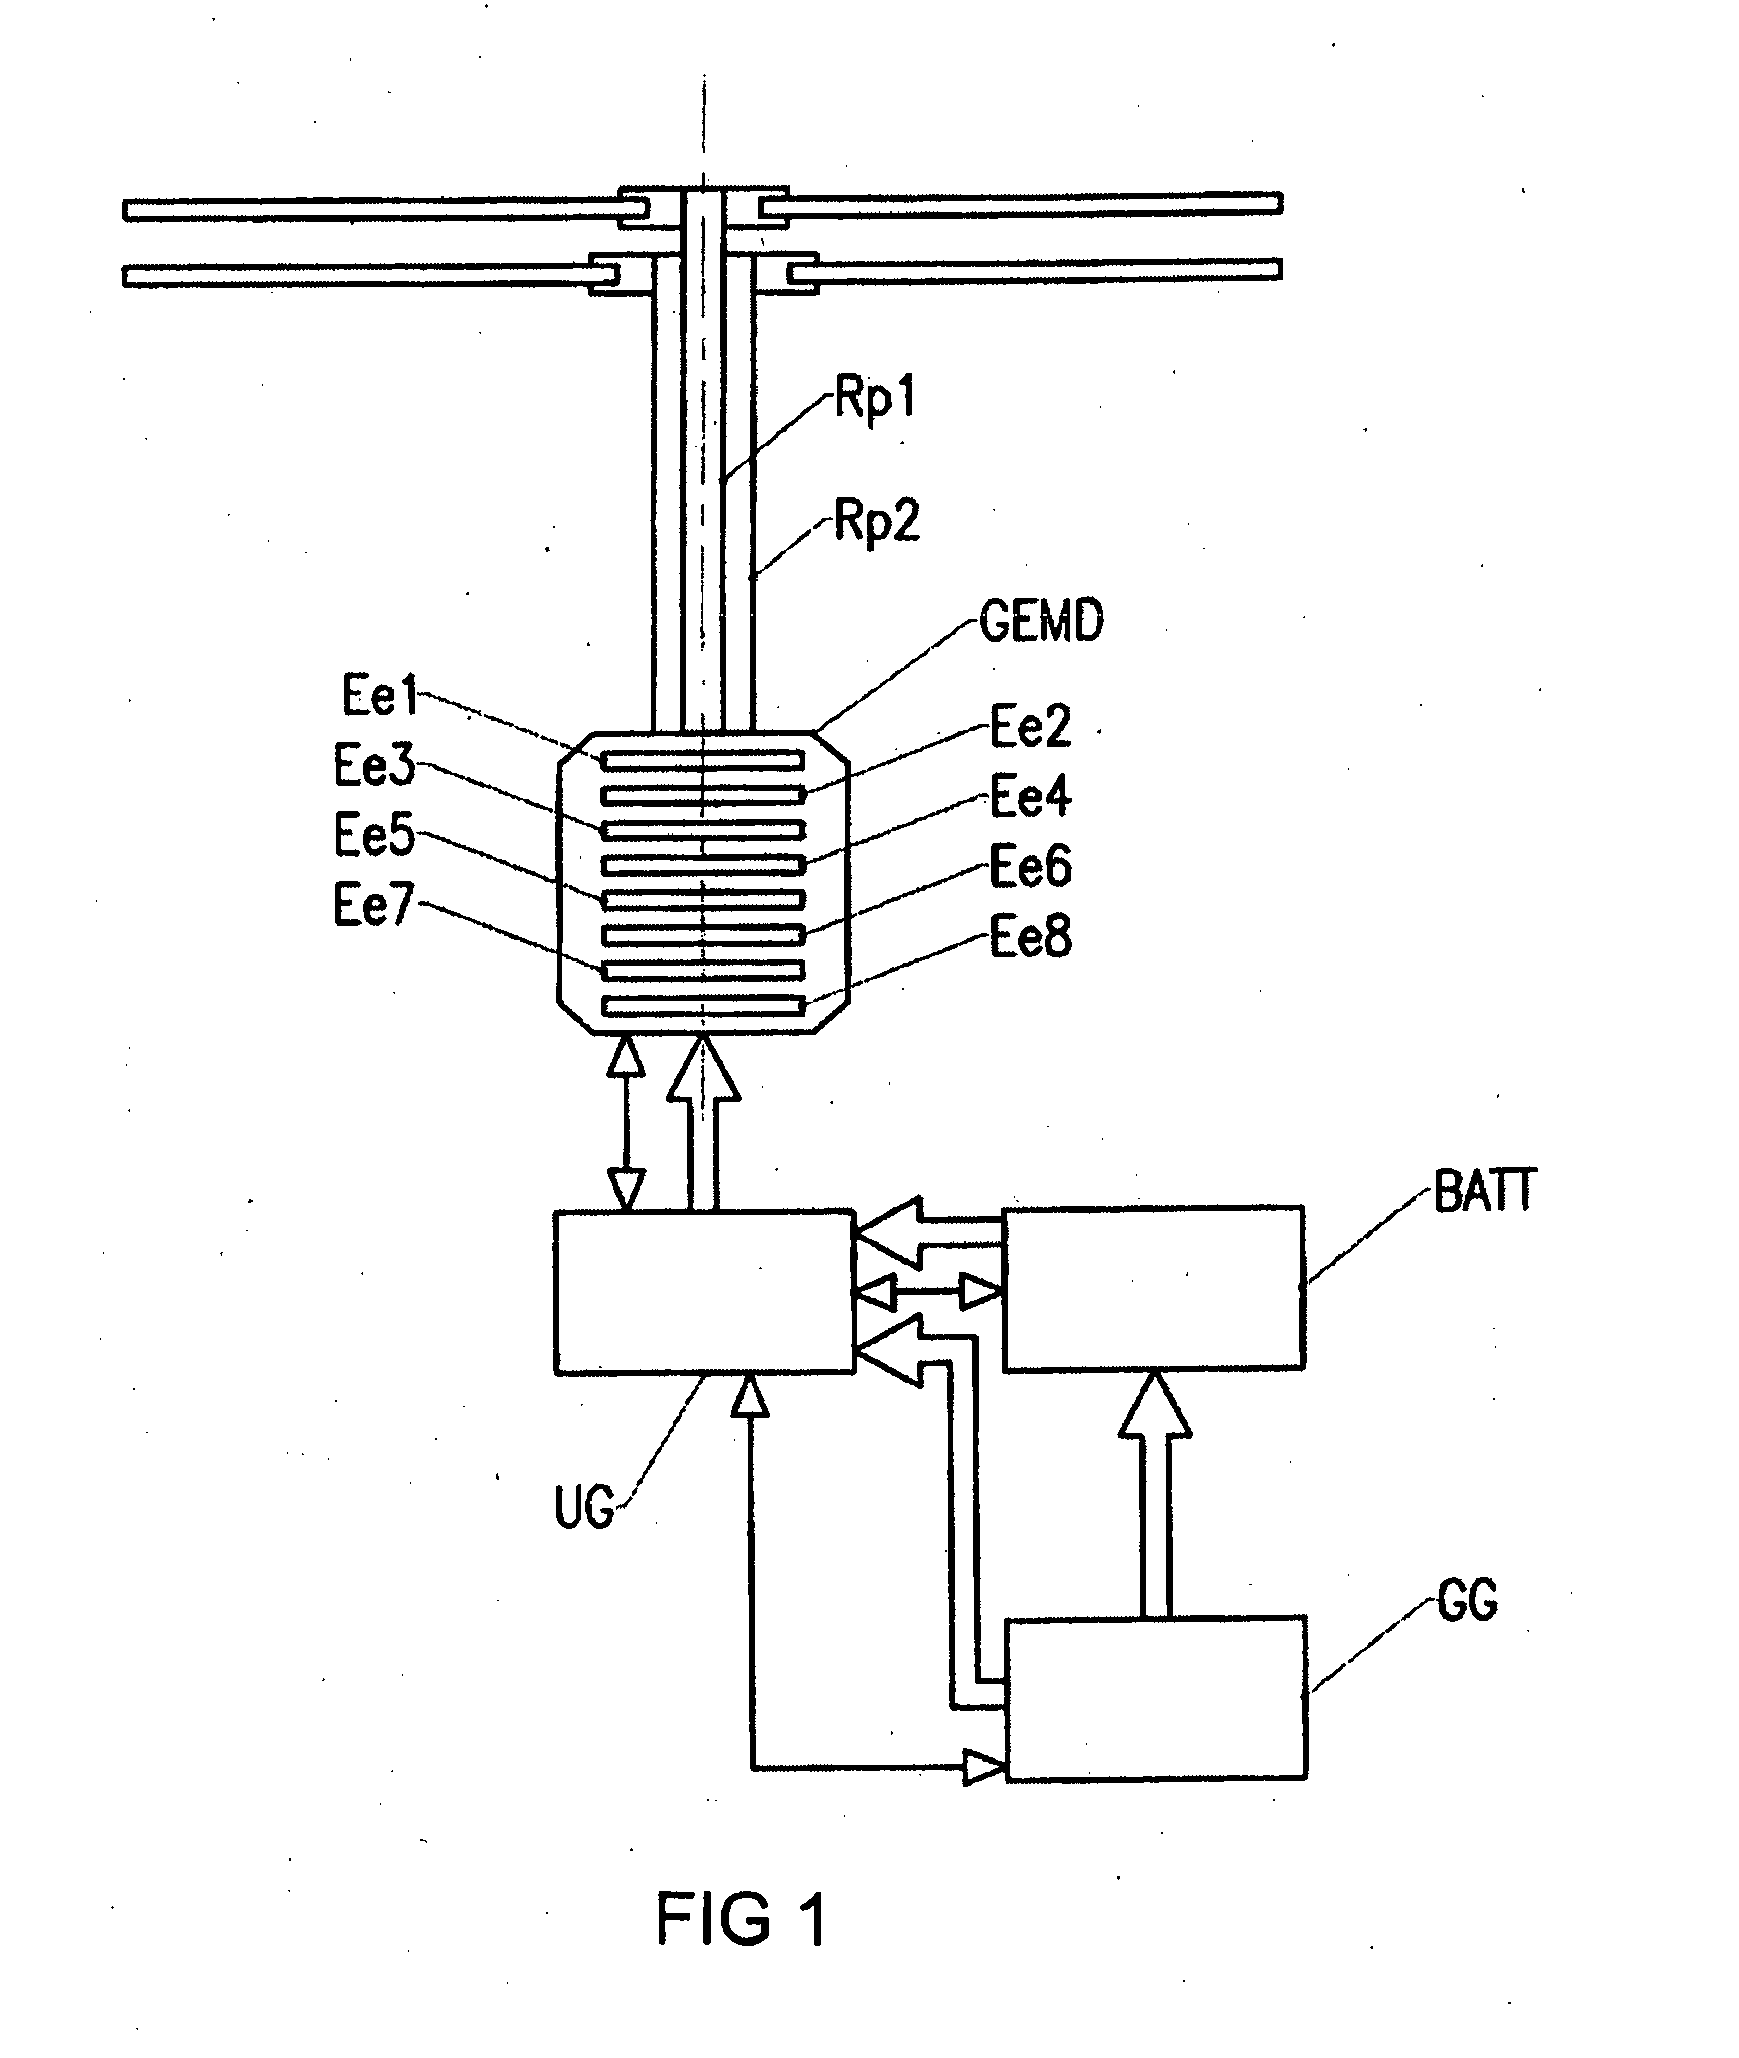 Electromagnetic power transmission for a rotary-wing aircraft or a fixed-wing aircraft